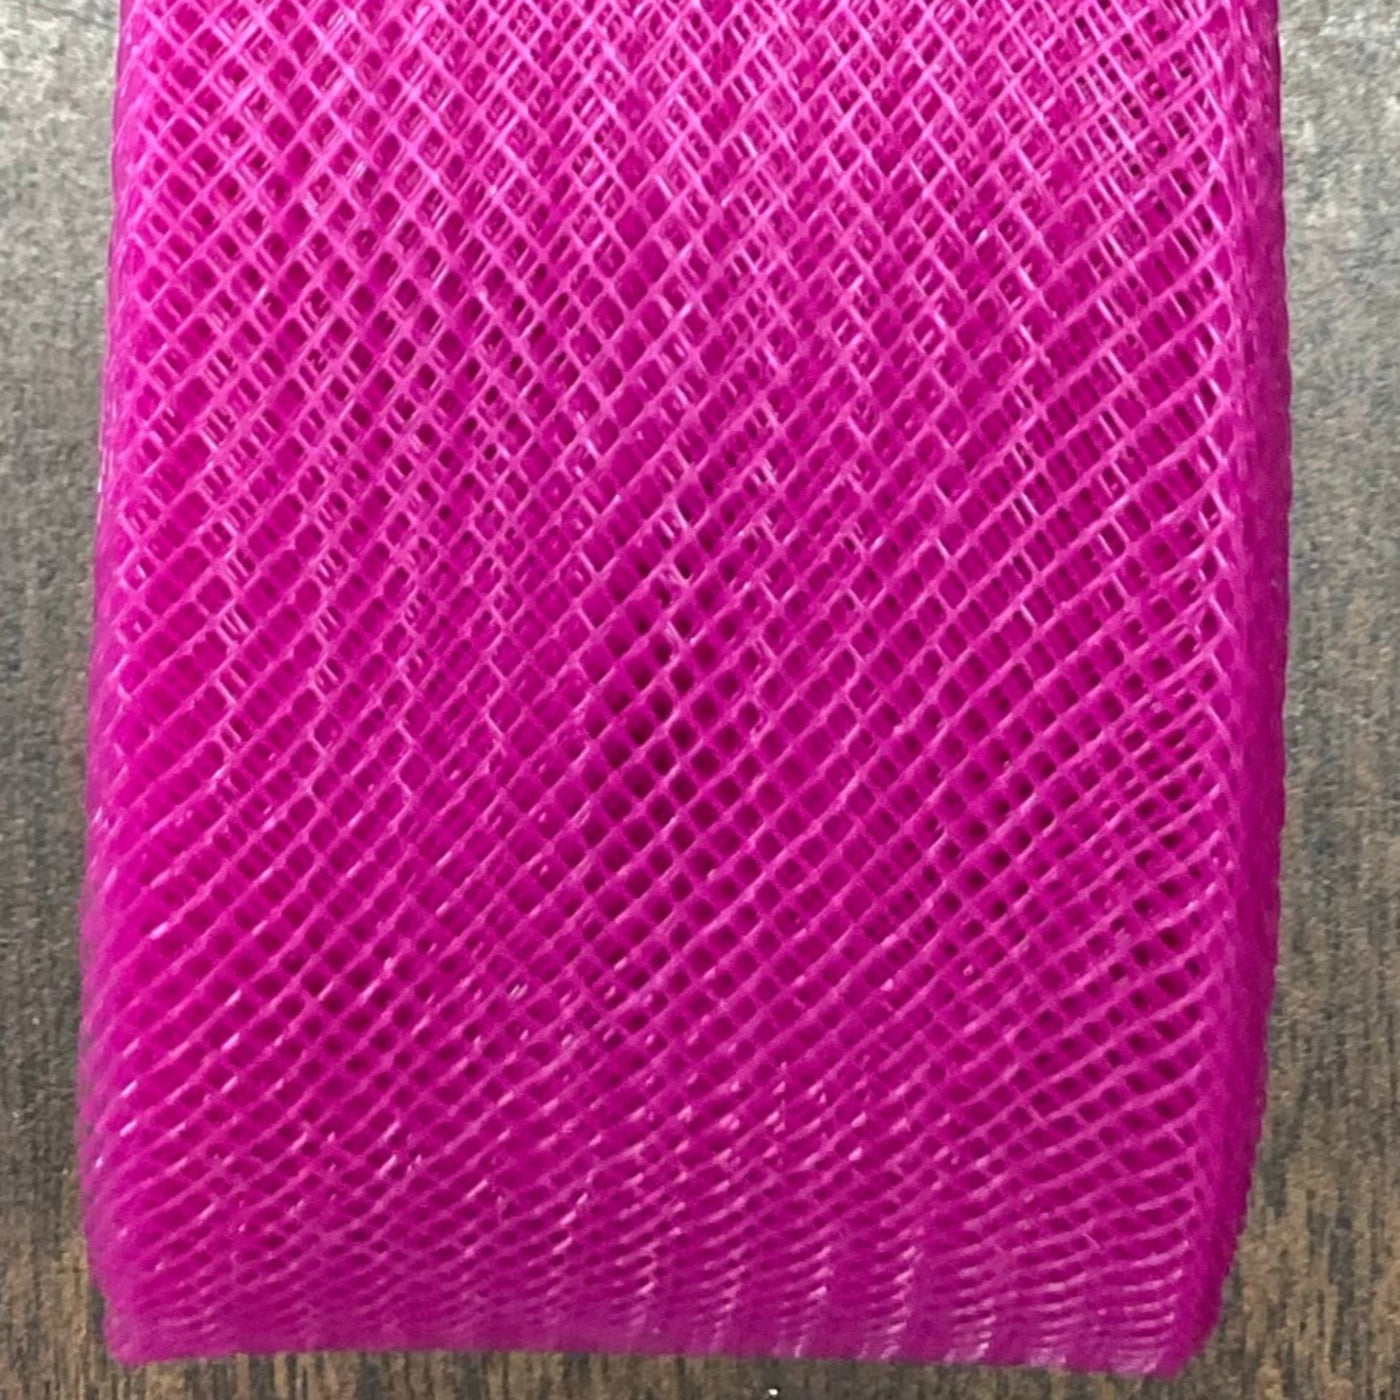 2" Wide Crinoline Webbing Horse hair Trim Braid for Sewing Polyester | Lace USA - Horse Hair 2" Wide Fuchsia 